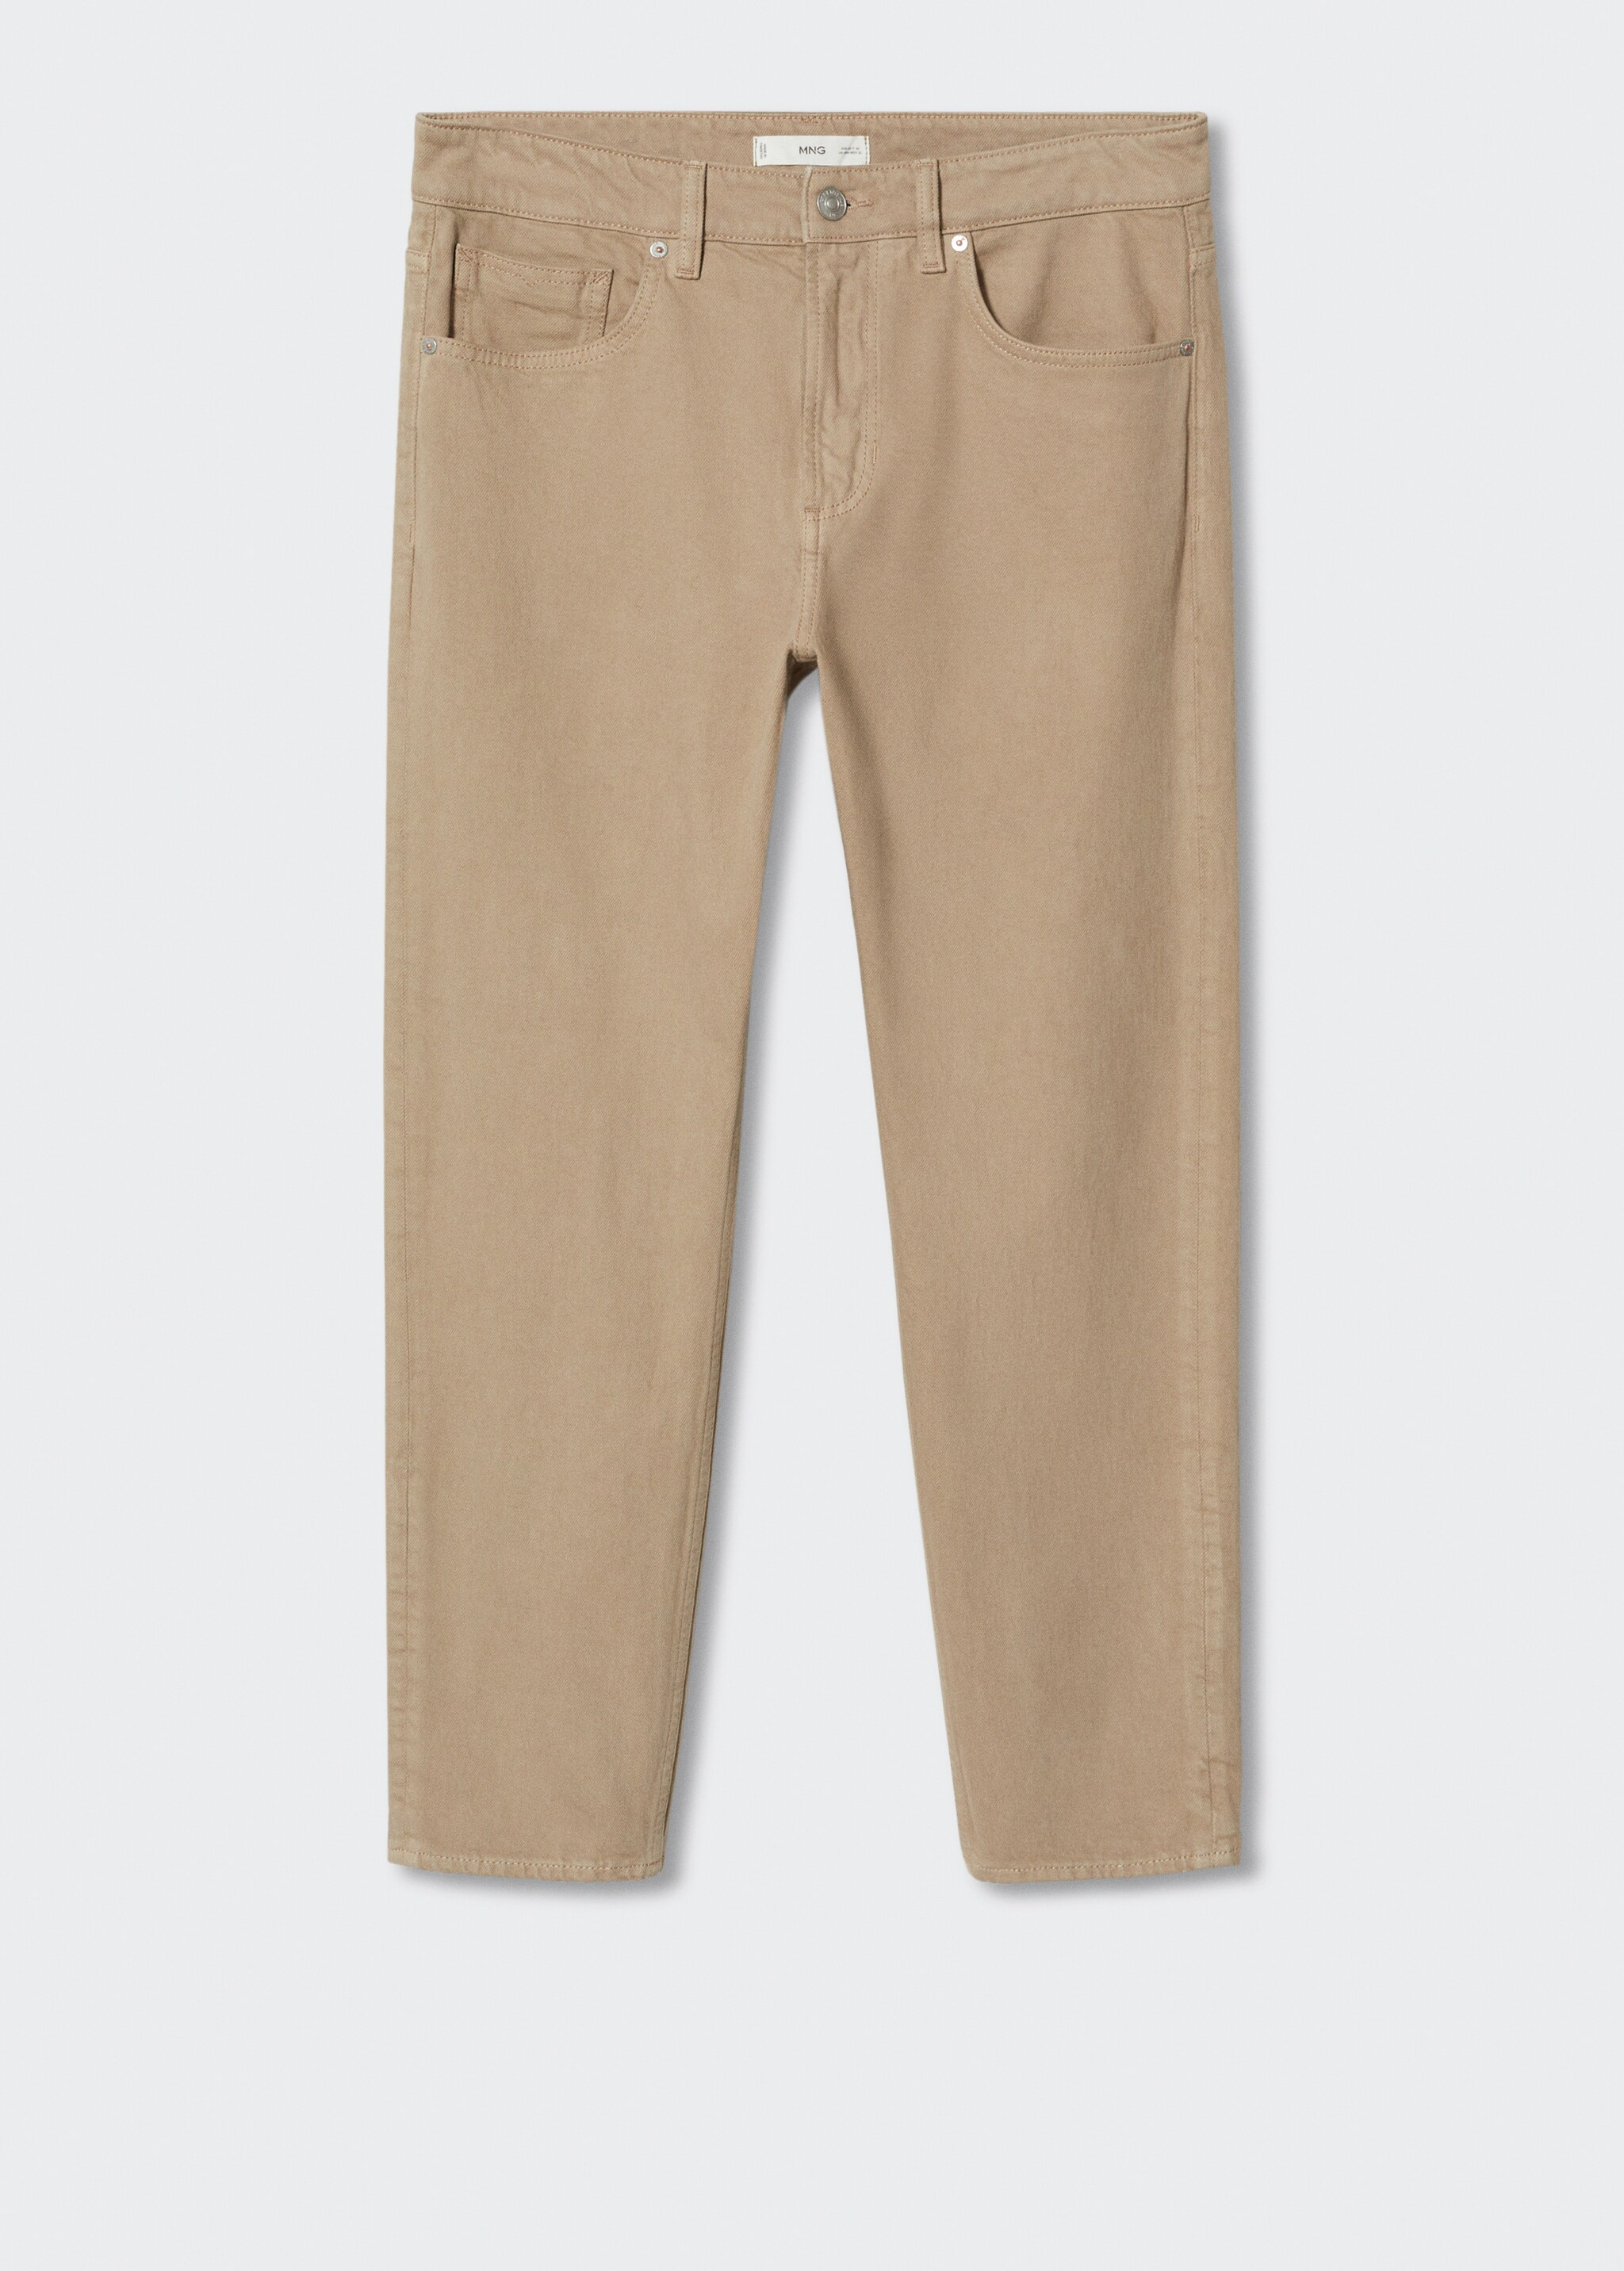 Ben tapered cropped jeans - Article without model